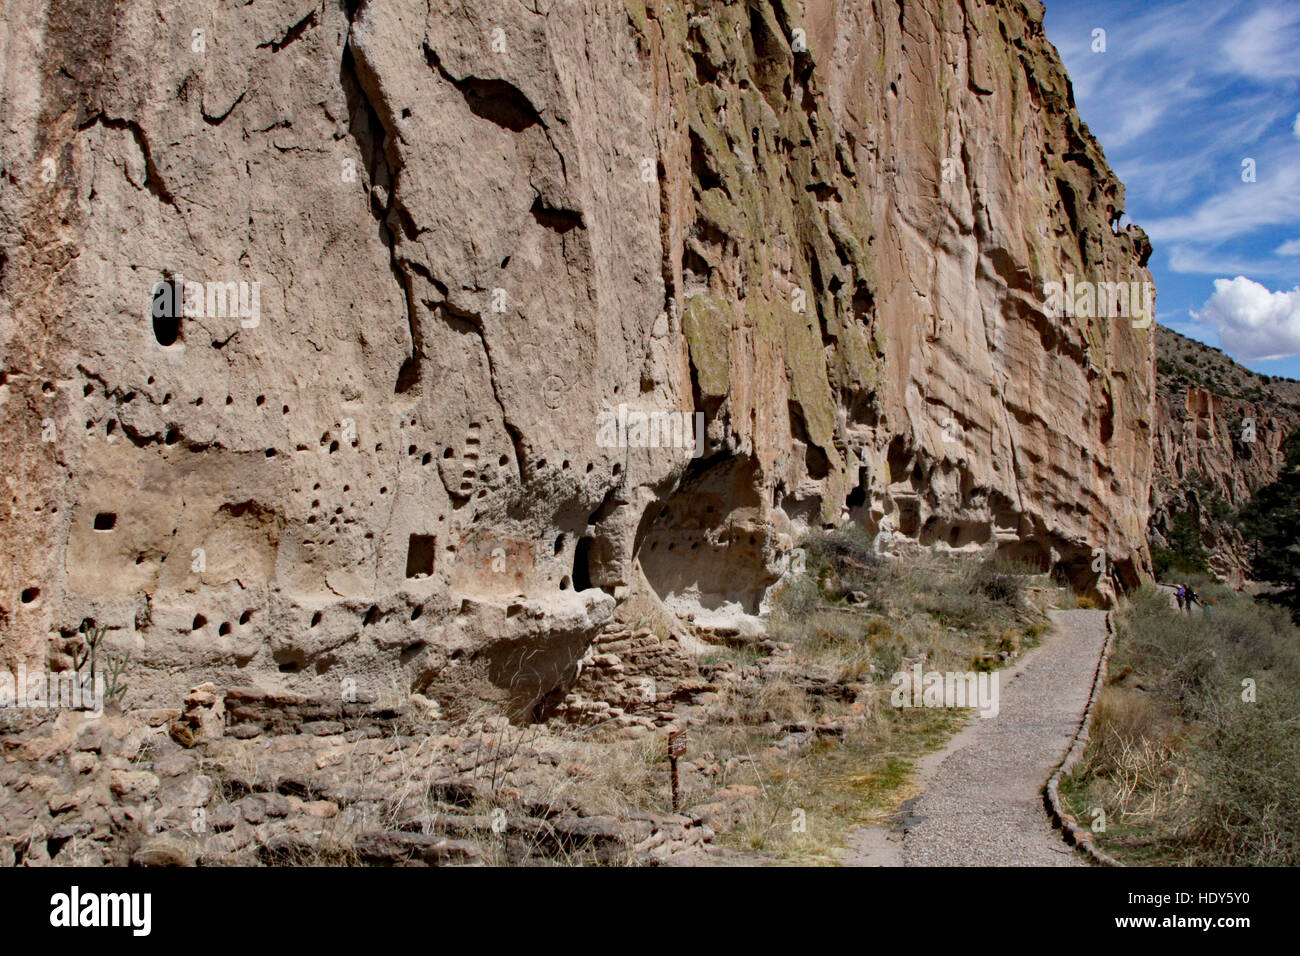 Path in Bandelier leads to rivers, petroglyphs, dwellings carved into the soft rock cliffs, and the remains of adobe dwellings Stock Photo